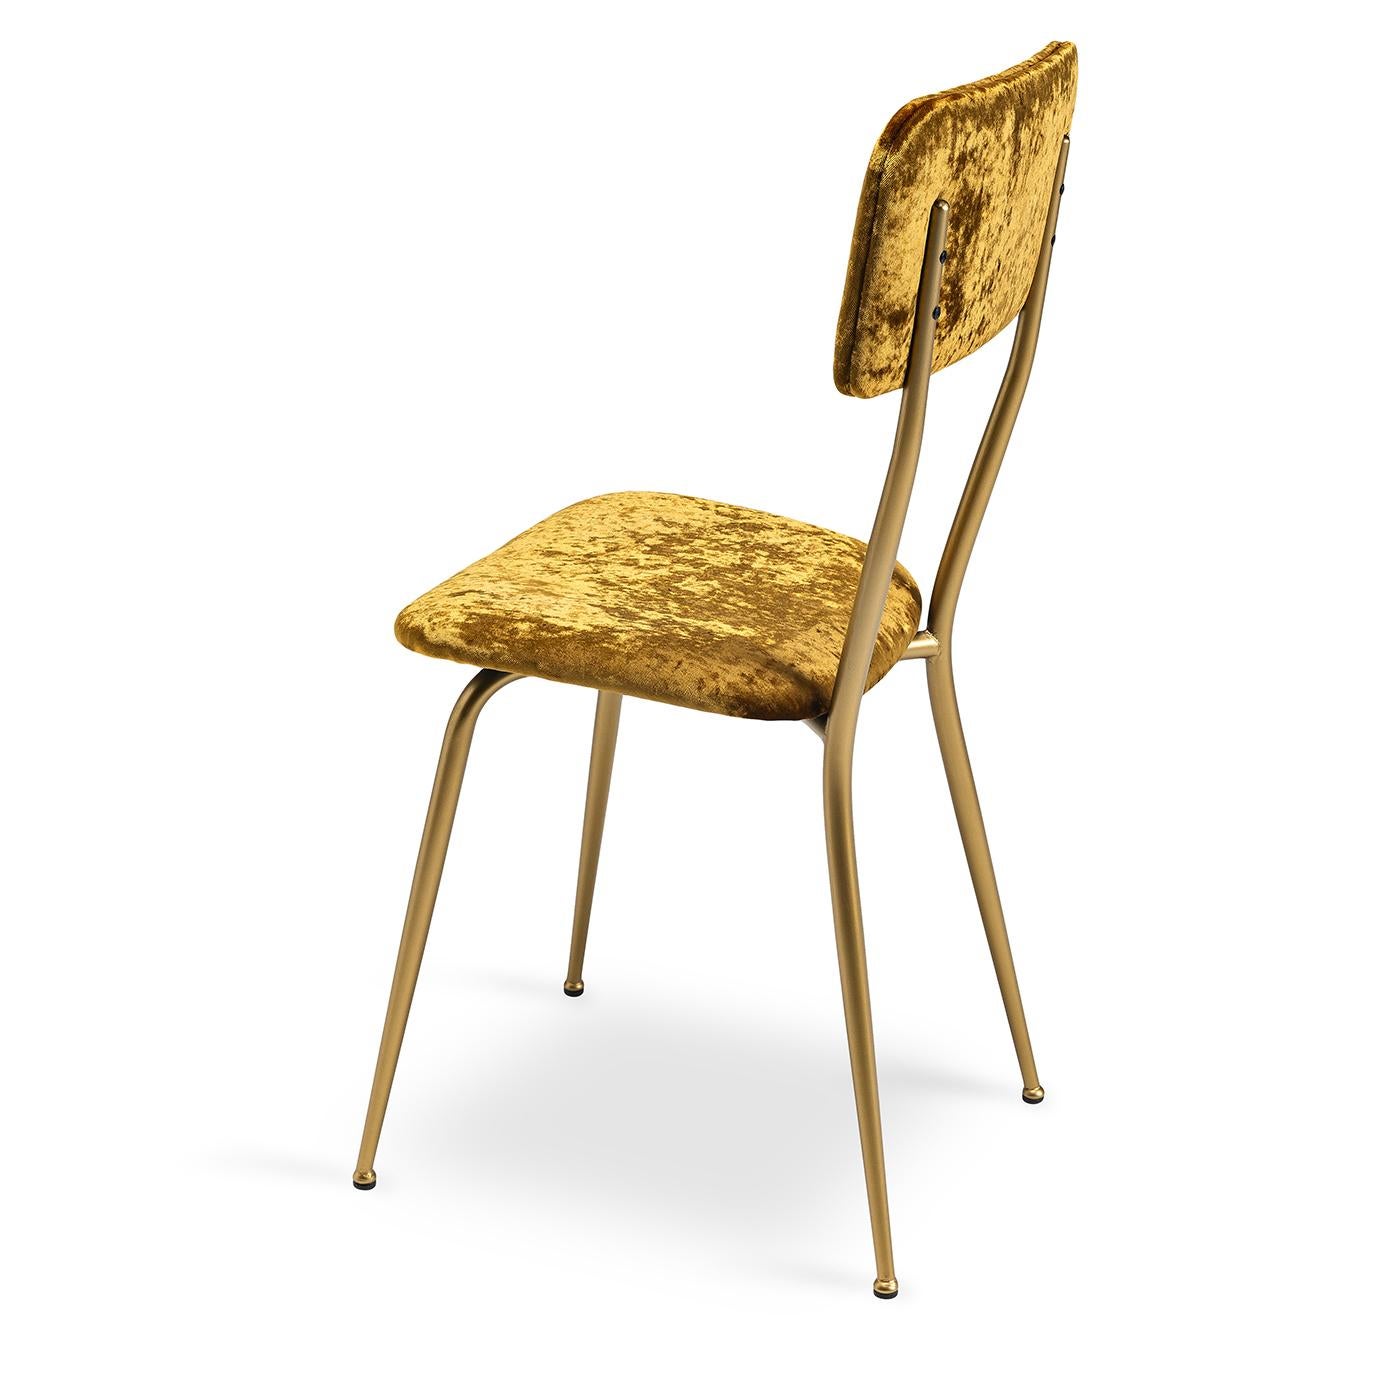 Draped in luxurious metallic tones, this sophisticated chair adds a touch of glamour to any modern living space. Its brushed brass metal frame is paired with gold velvet upholstery on the seat and backrest, padded for extra comfort. Thanks to its